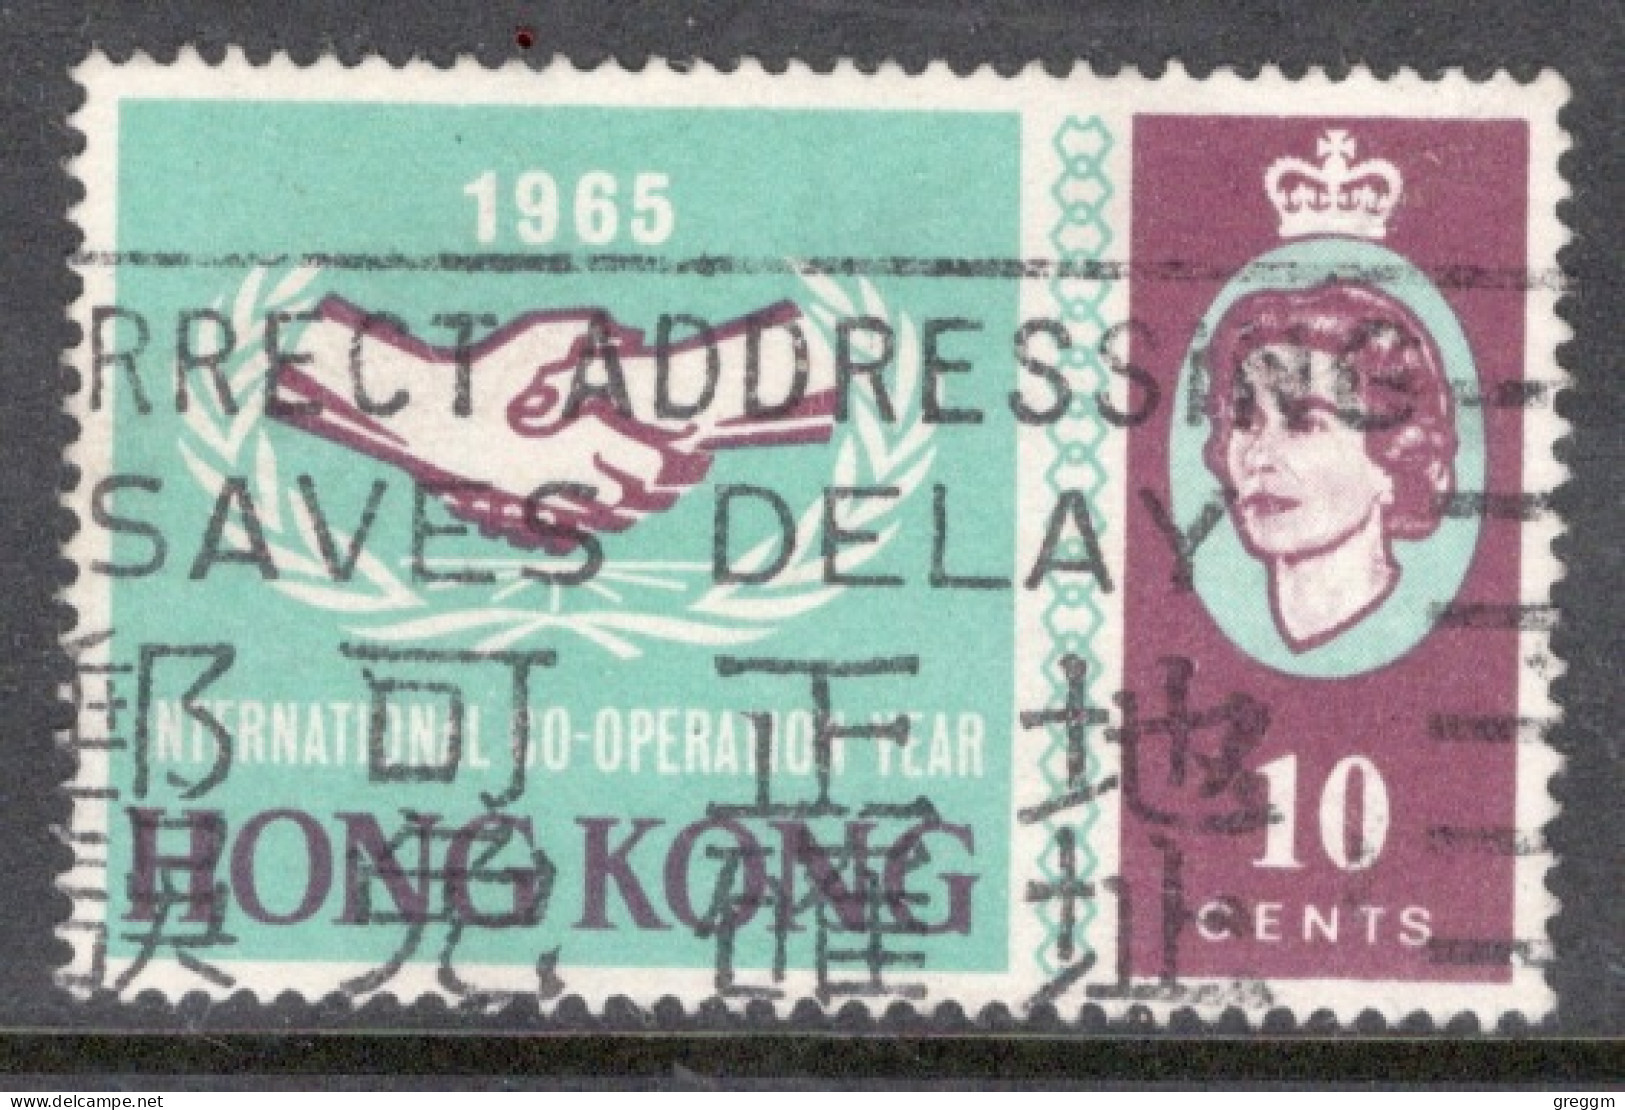 Hong Kong 1965 A Single Stamp From The I.C.Y. Set In Fine Used - Oblitérés